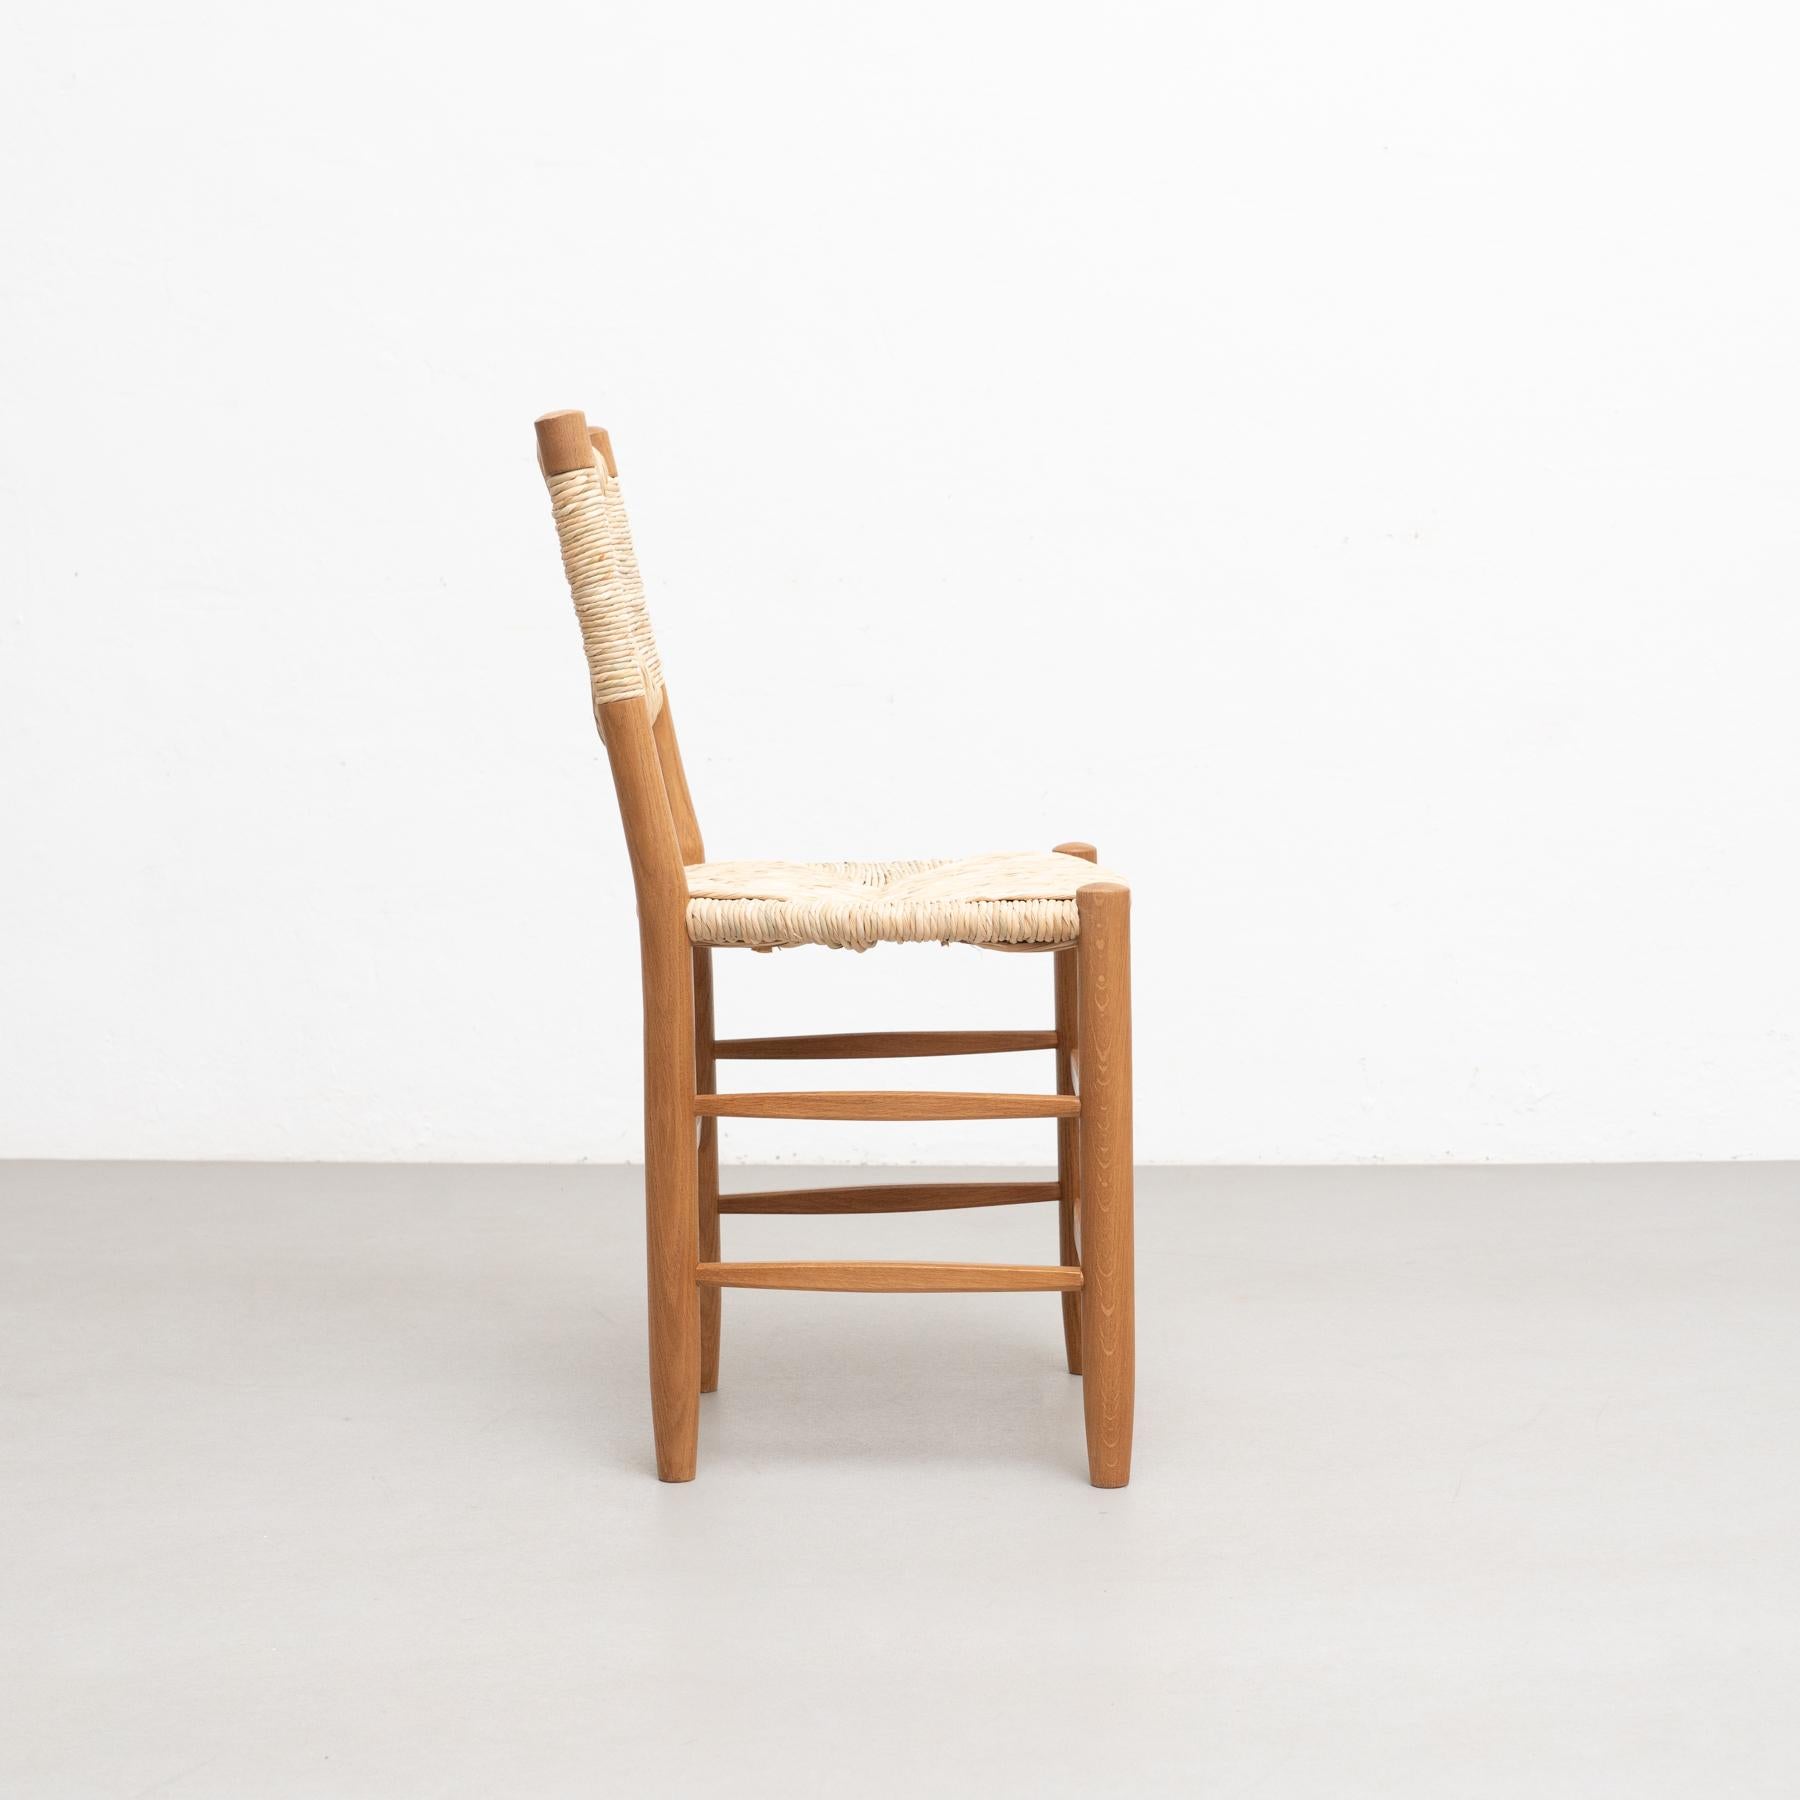 Set of 6 After Charlotte Perriand n.19 Chairs, Wood Rattan, Mid-Century Modern For Sale 11